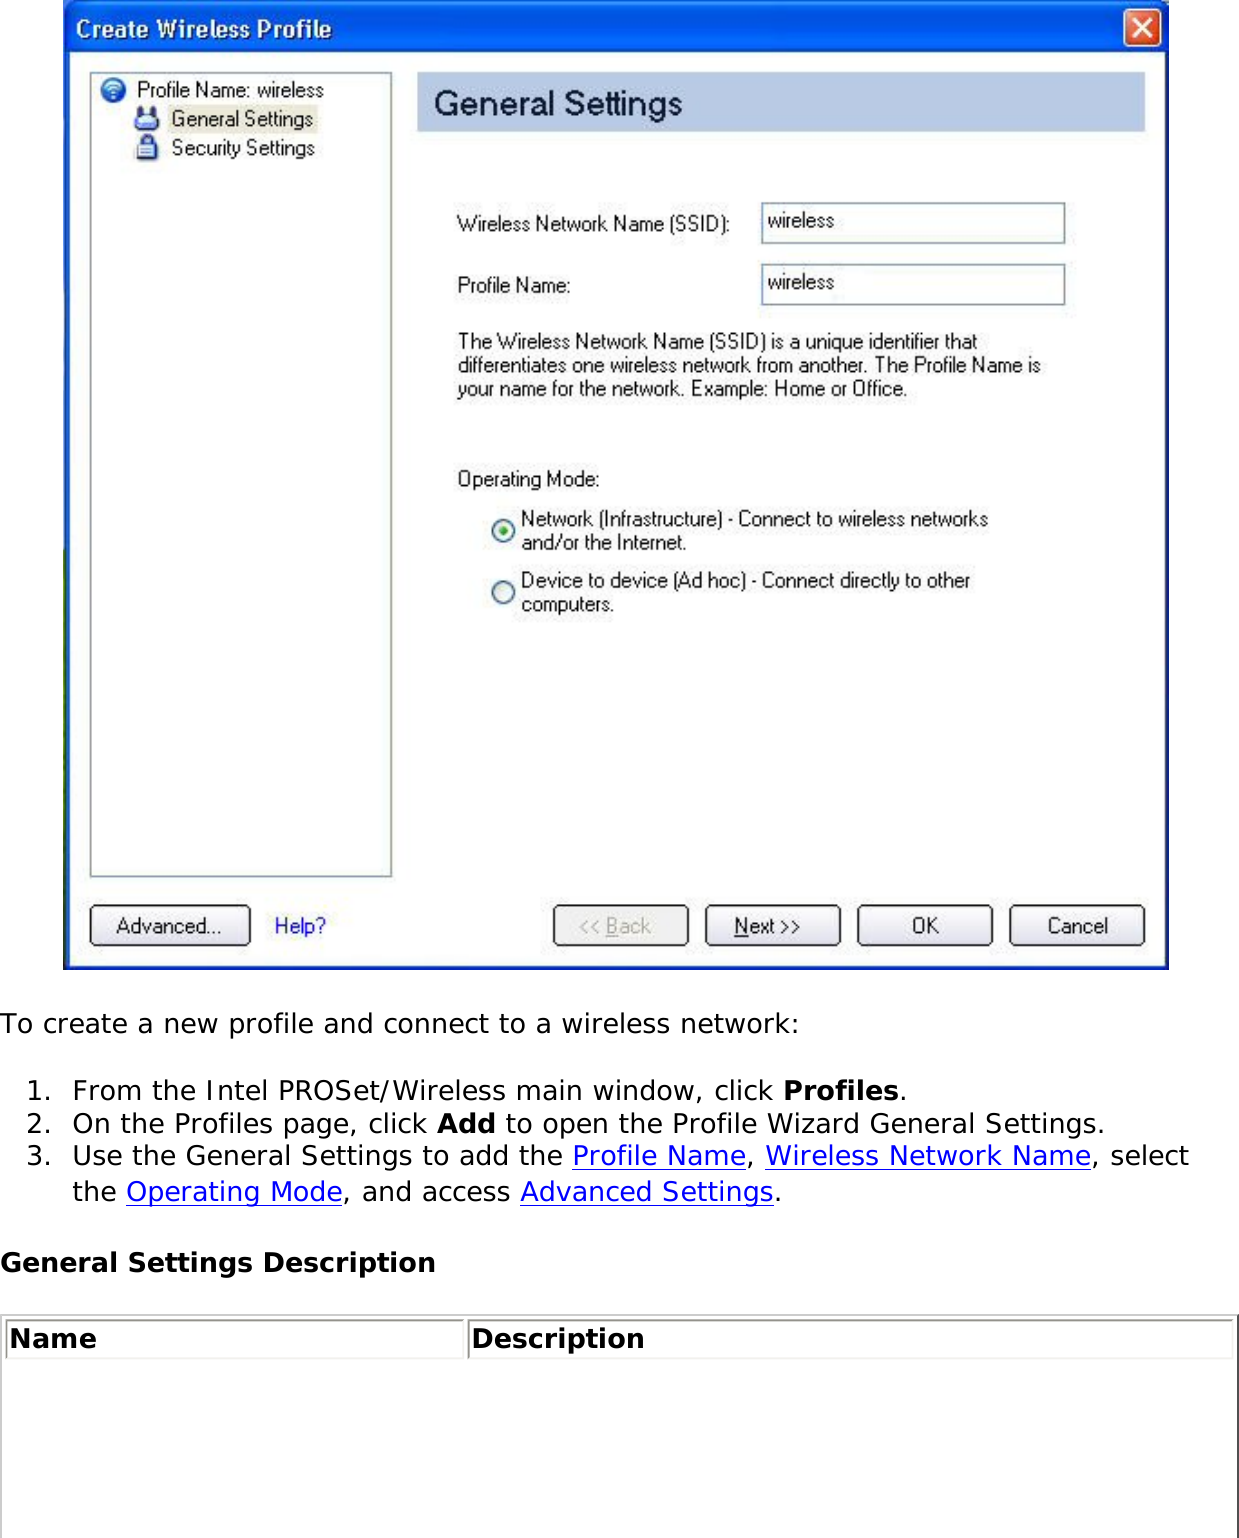  To create a new profile and connect to a wireless network: 1.  From the Intel PROSet/Wireless main window, click Profiles. 2.  On the Profiles page, click Add to open the Profile Wizard General Settings. 3.  Use the General Settings to add the Profile Name, Wireless Network Name, select the Operating Mode, and access Advanced Settings. General Settings DescriptionName Description